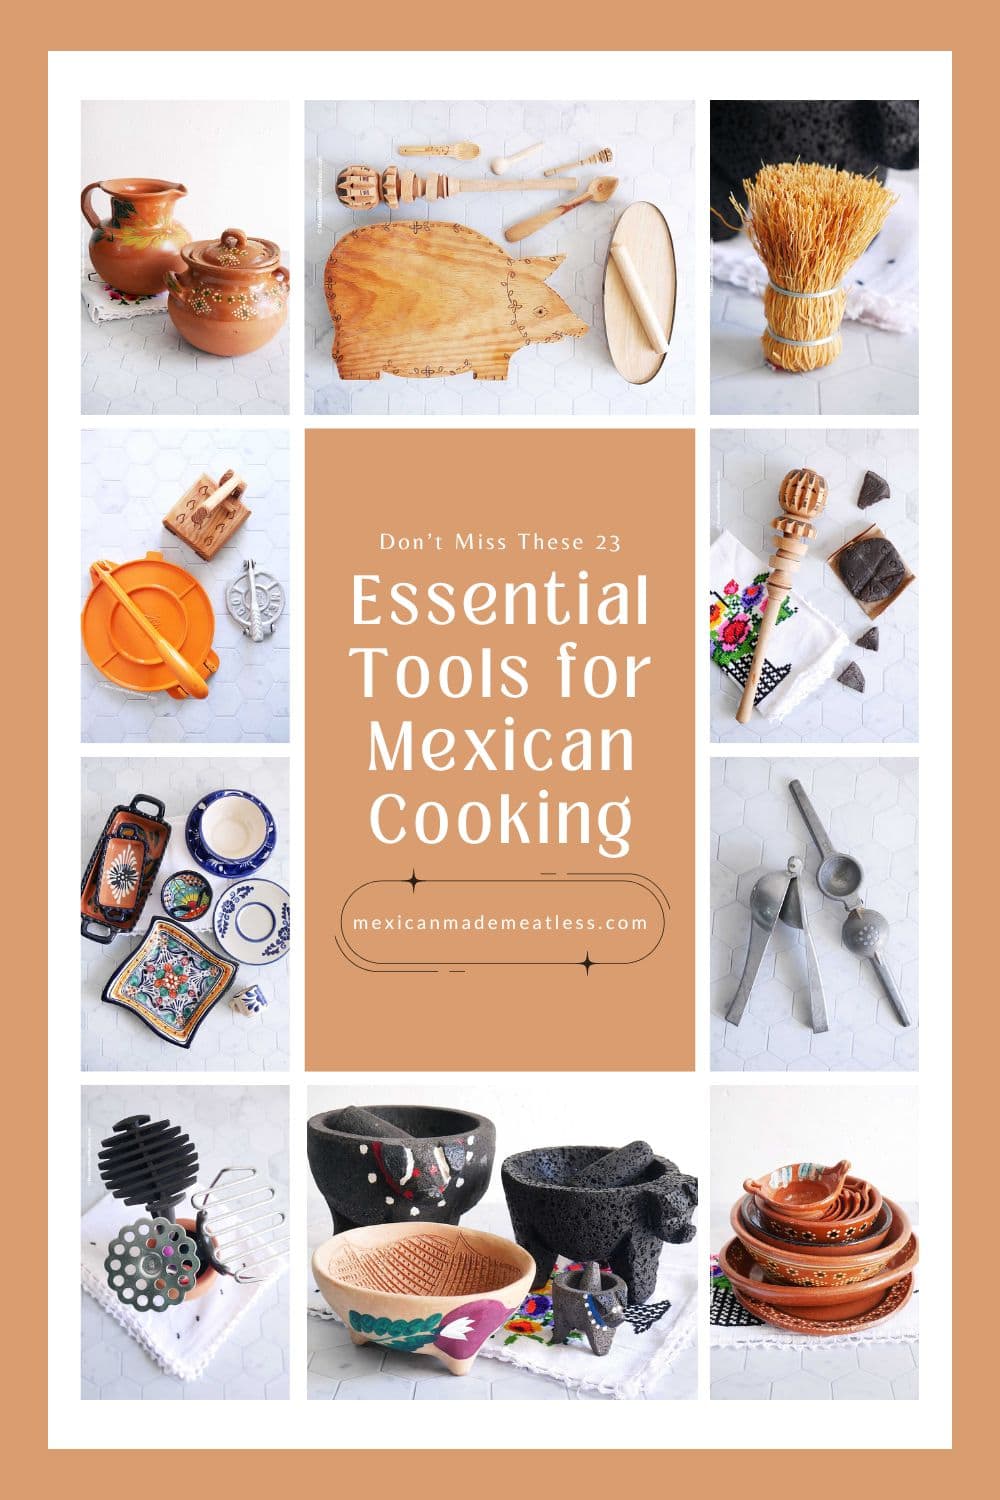 A collage of photos showing the essential tools for Mexican cooking.